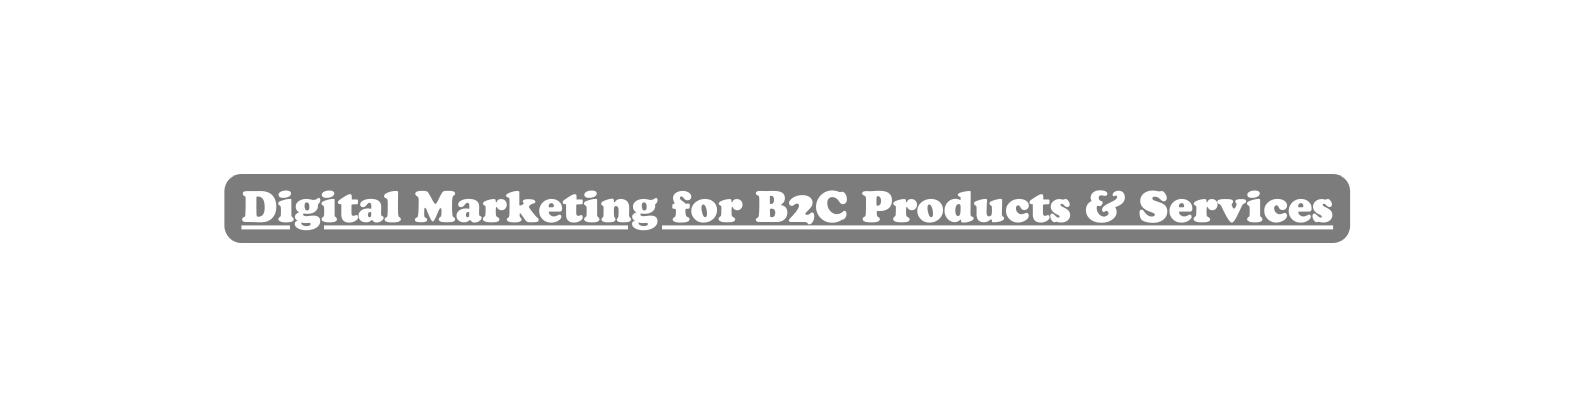 Digital Marketing for B2C Products Services